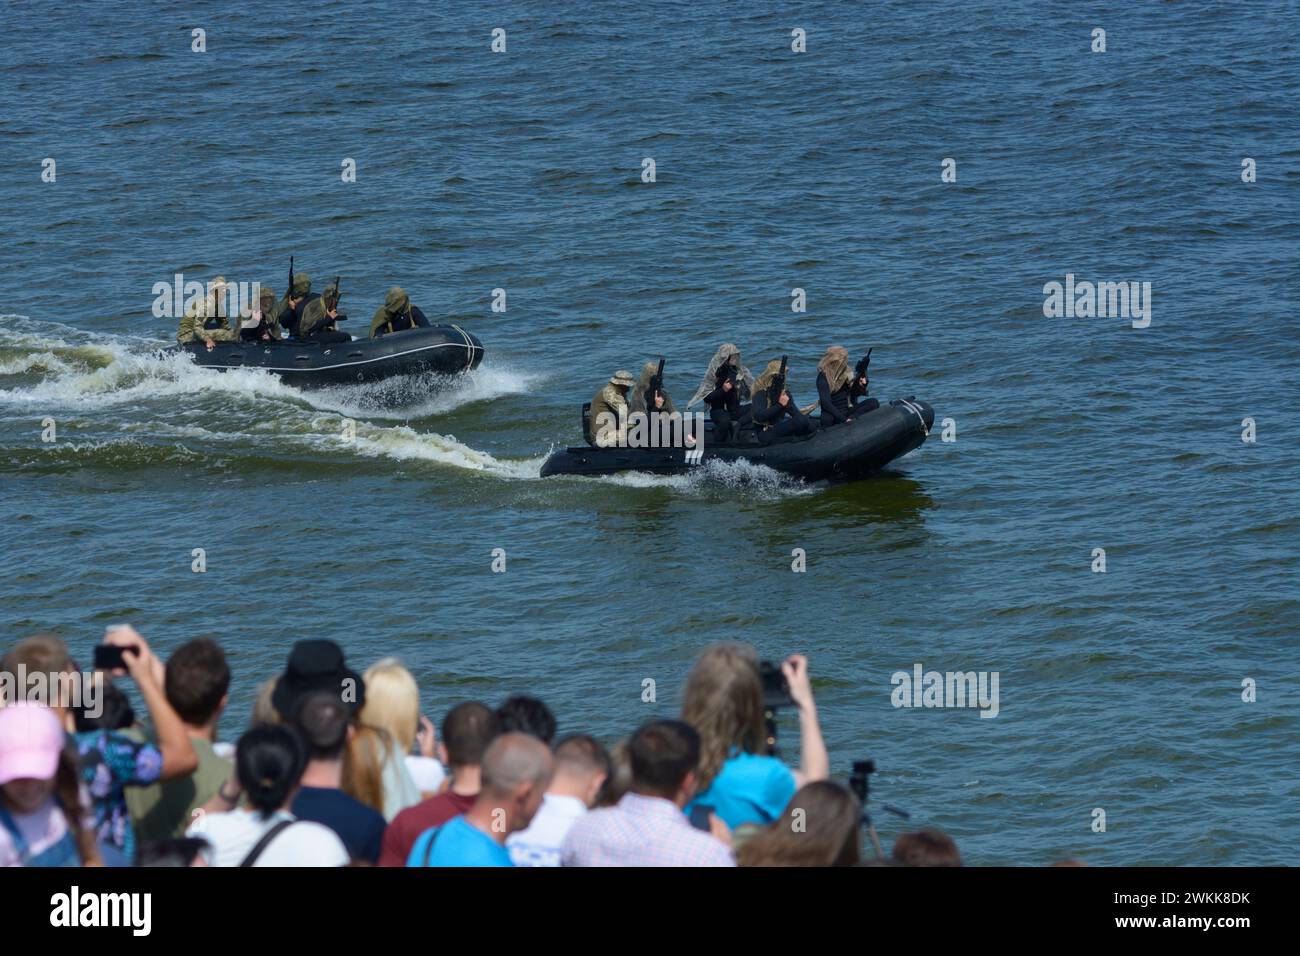 Military boats floating on water, armed soldiers of Special Forces aboard, crowd of people watching. August 24, 2021. Military parade to the Independe Stock Photo